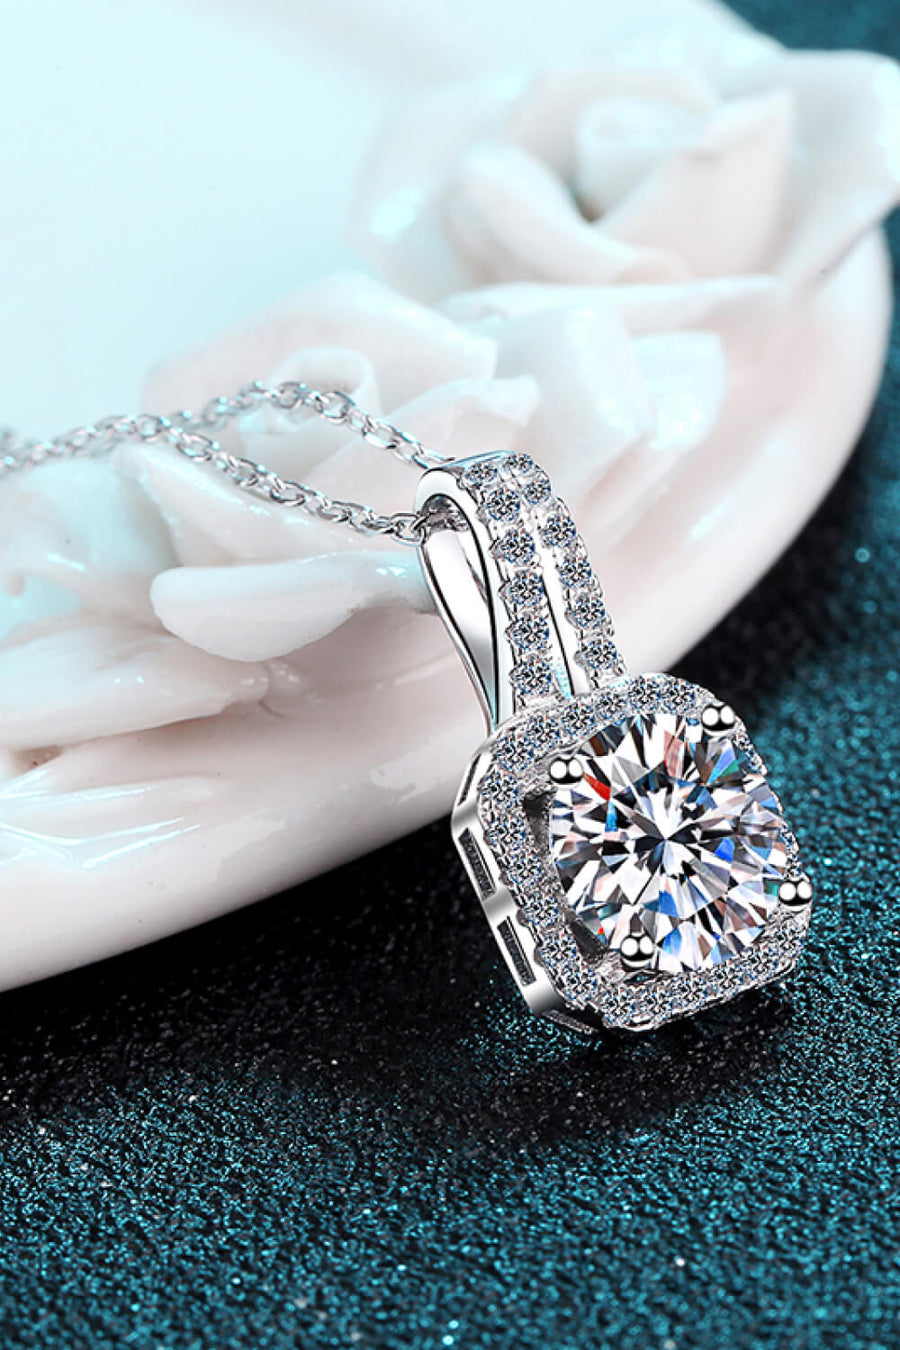 Special One 1 Carat Moissanite Necklace